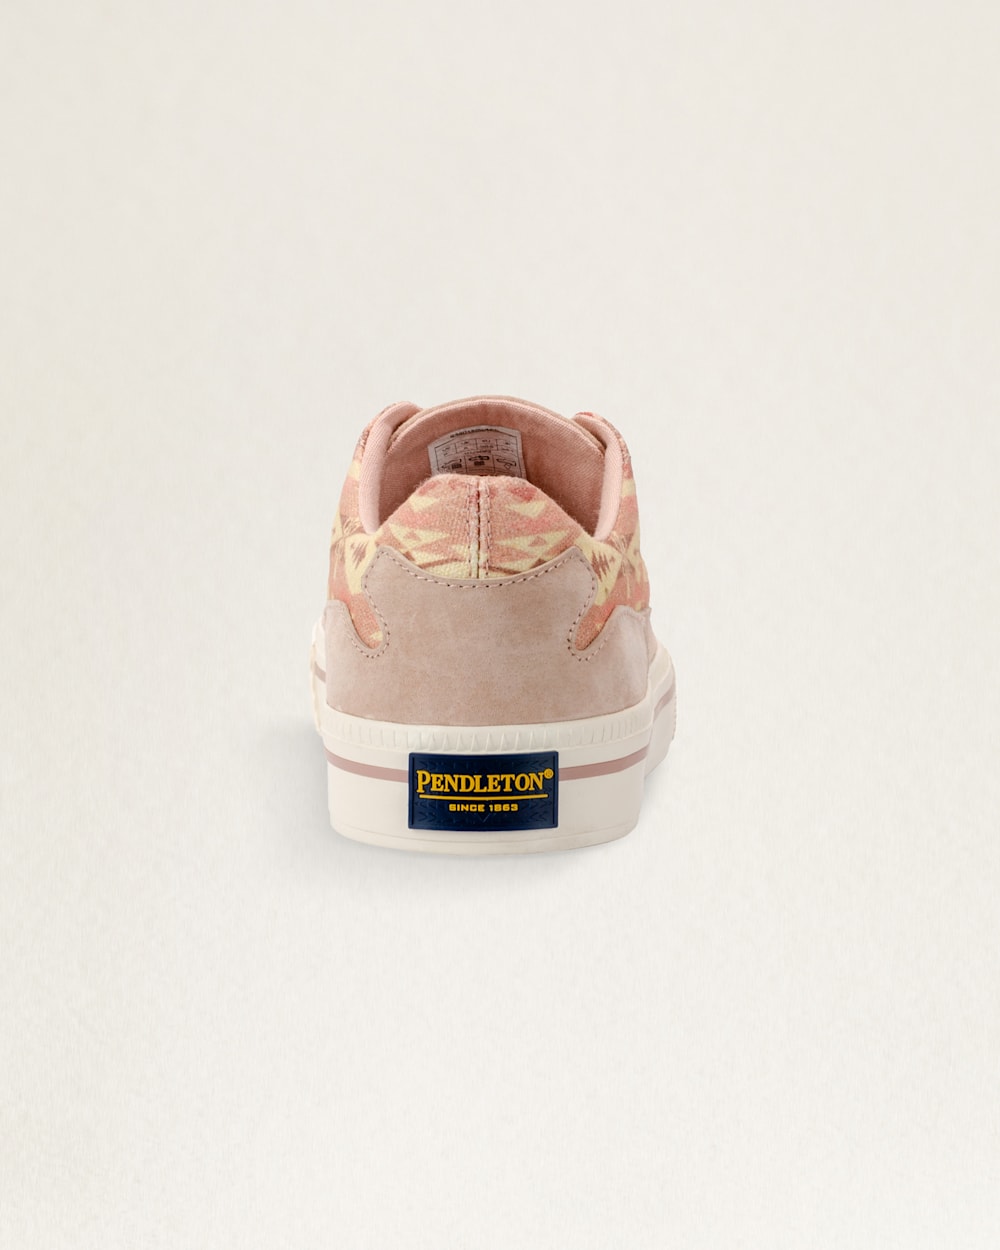 ALTERNATE VIEW OF WOMEN'S VULCANIZED SNEAKERS IN ROSE TUCSON image number 2